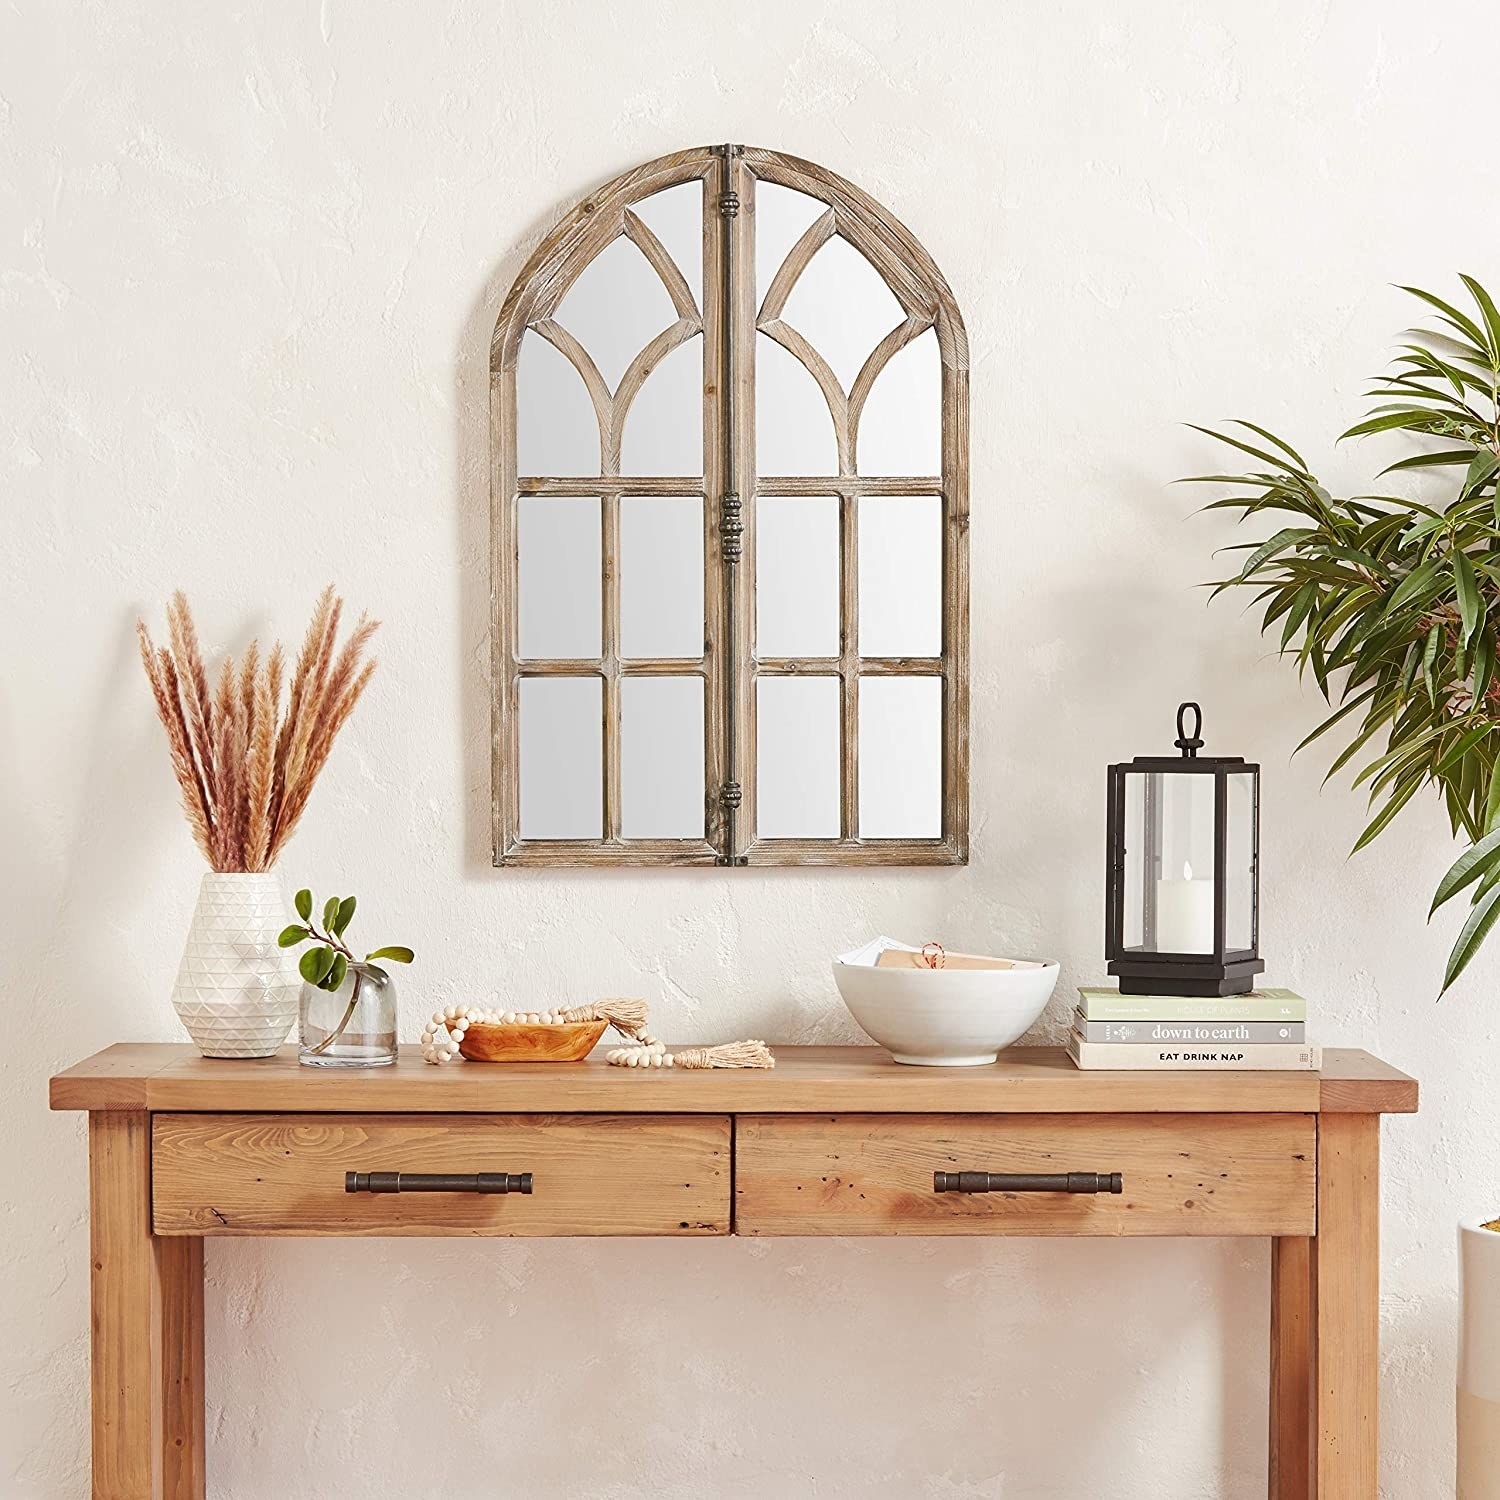 the mantel mirror above a wall table